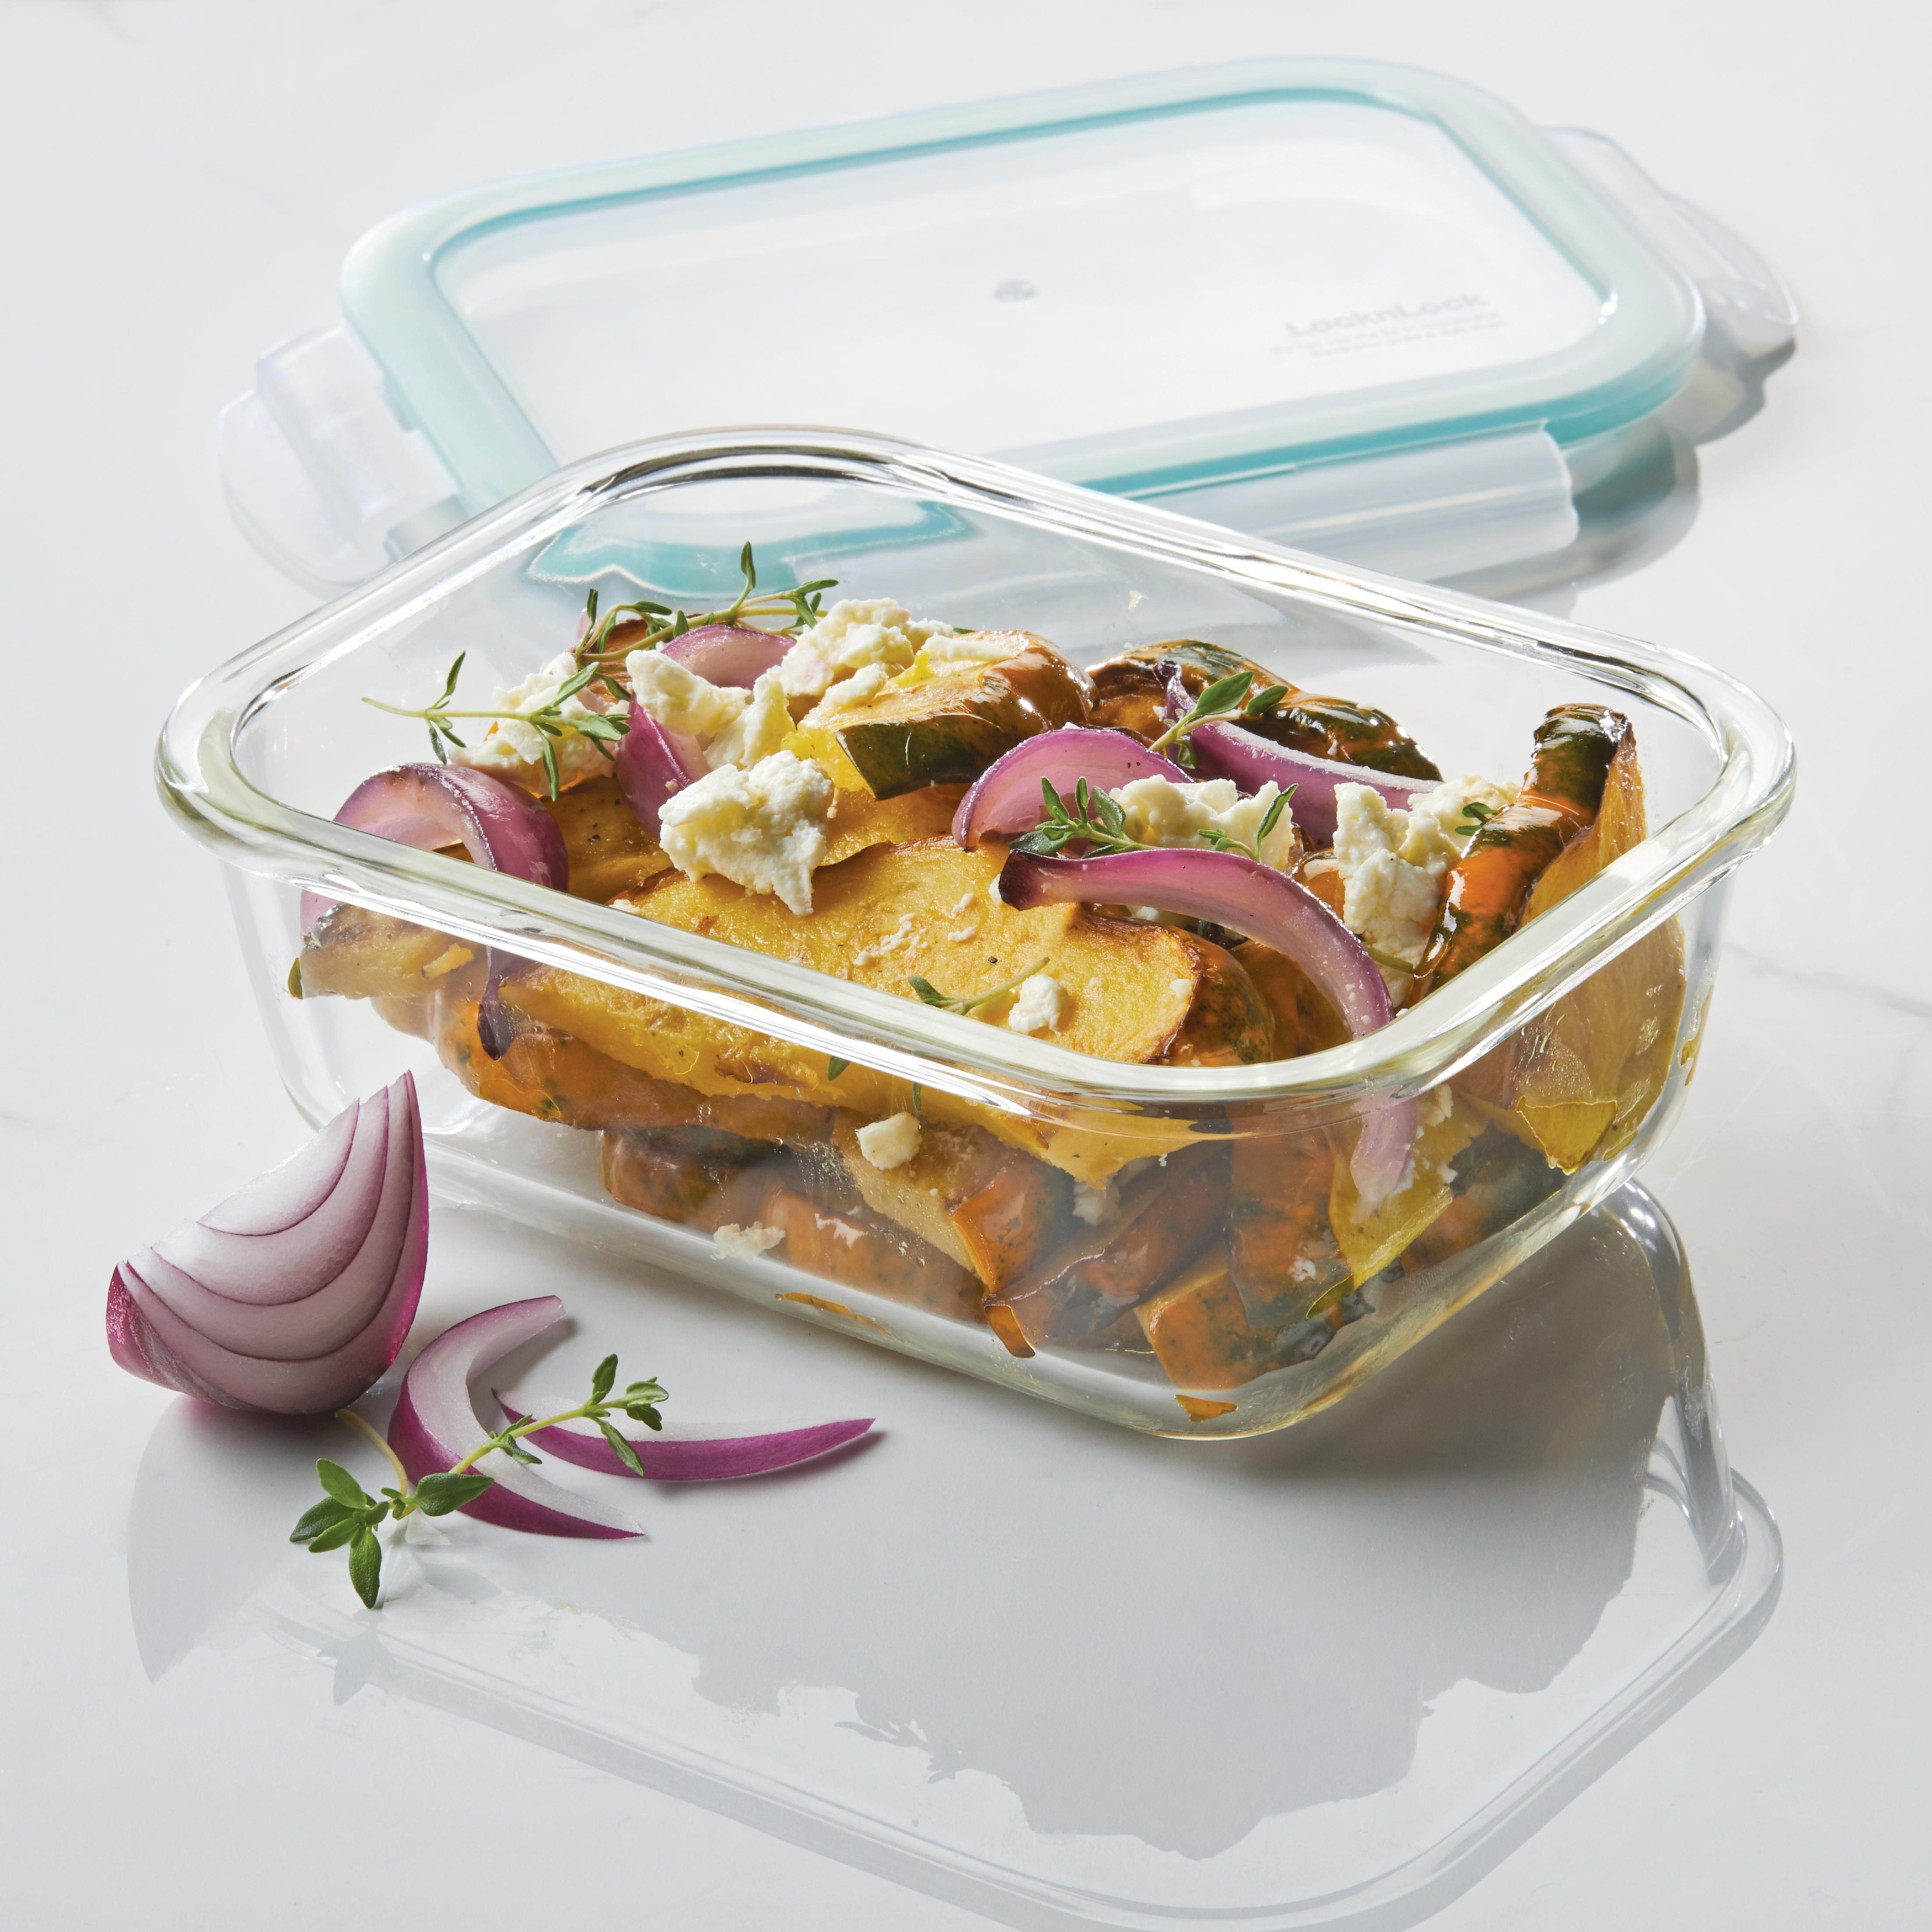 https://ak1.ostkcdn.com/images/products/is/images/direct/57a7d8765382ccbb203545c9e60ee39710806b41/LocknLock-Purely-Better-Glass-Food-Storage-Containers-21oz-4-PC-Set.jpg